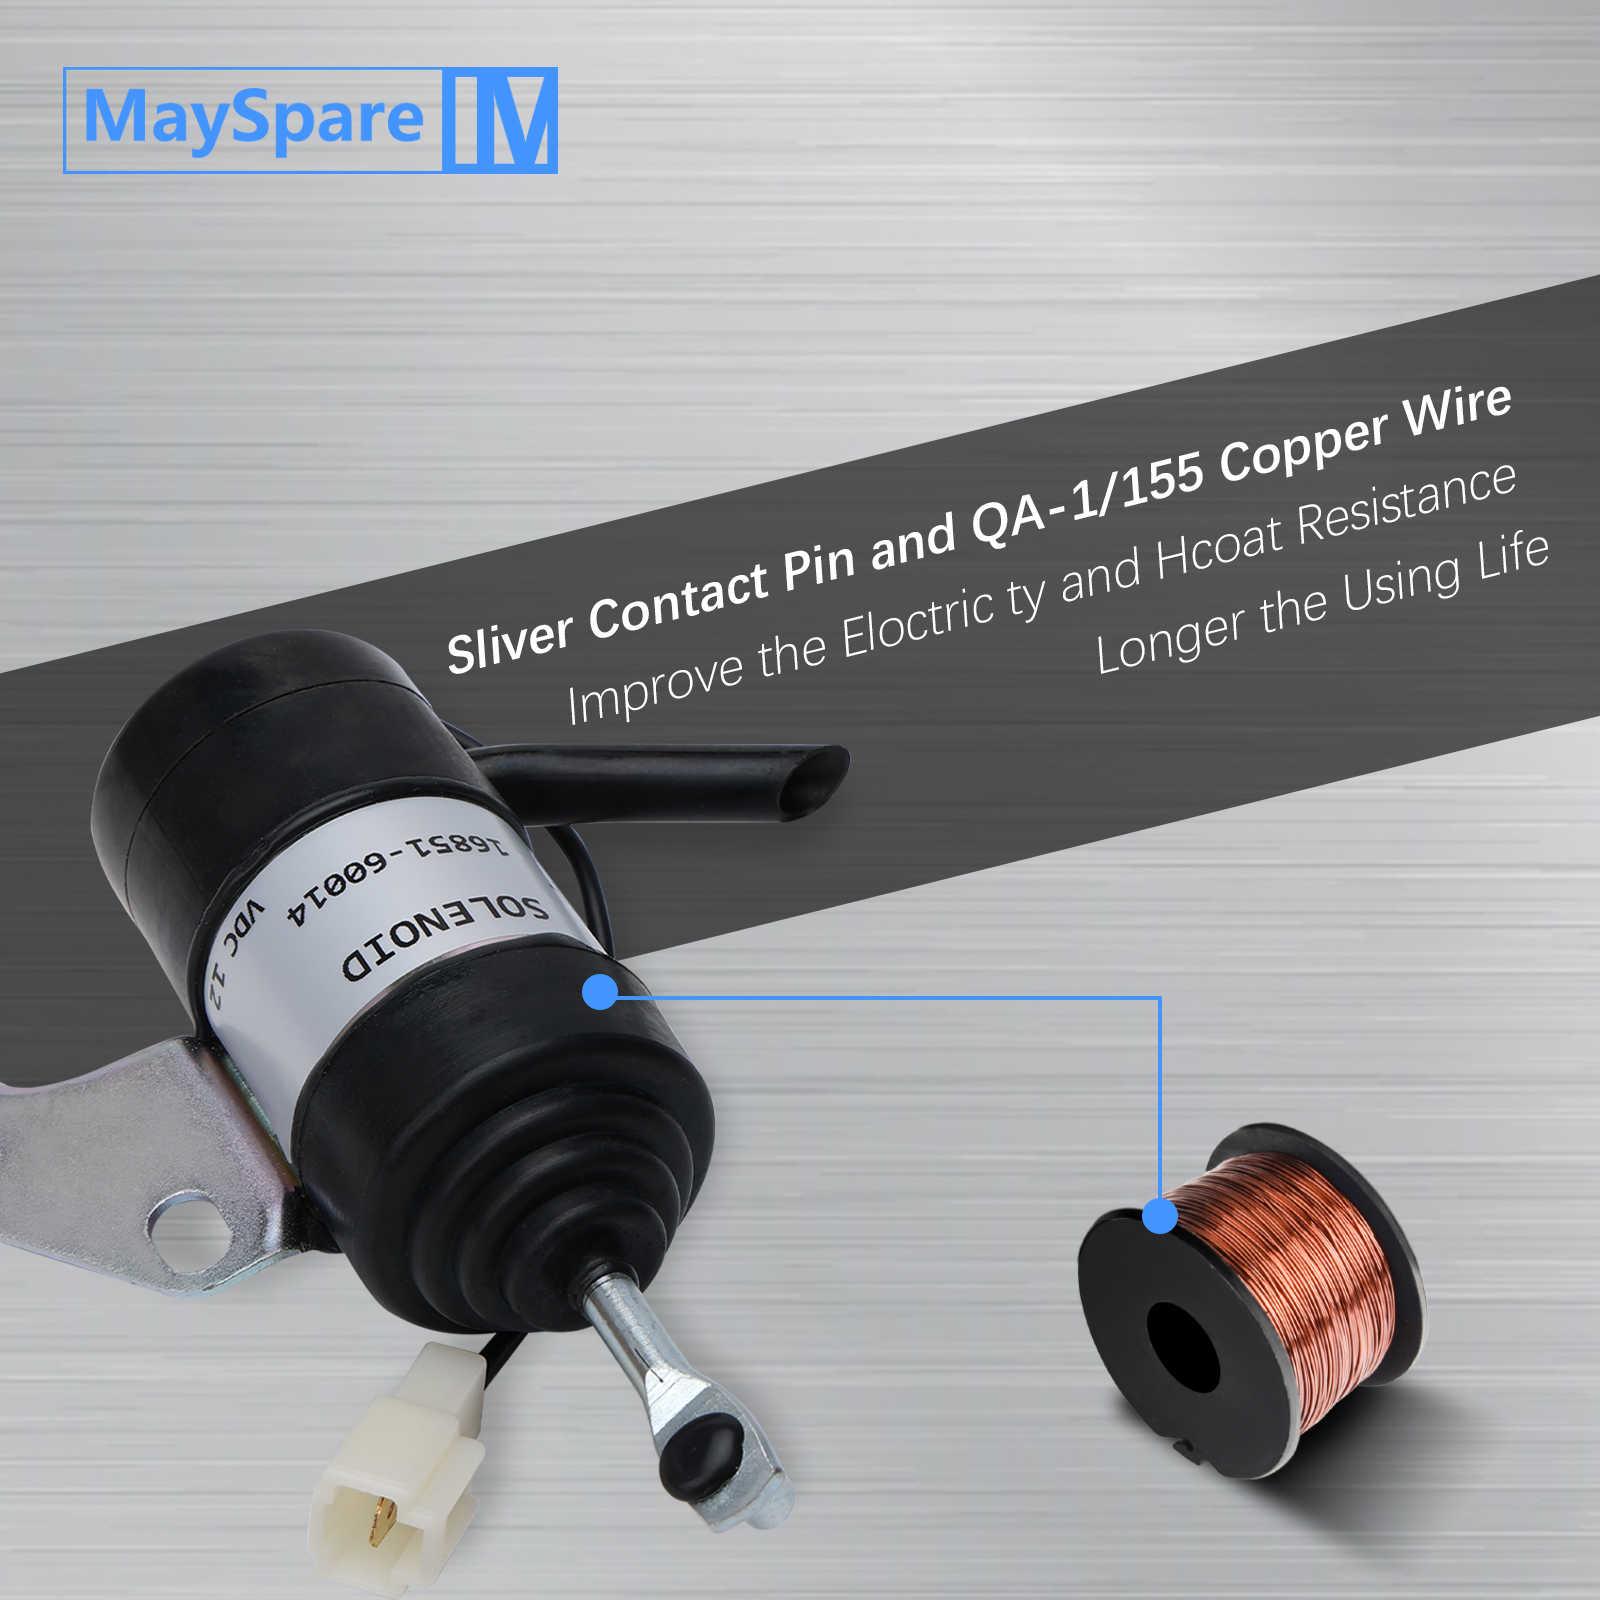 mayspare Fuel Shut Off Solenoid and Copper Coil